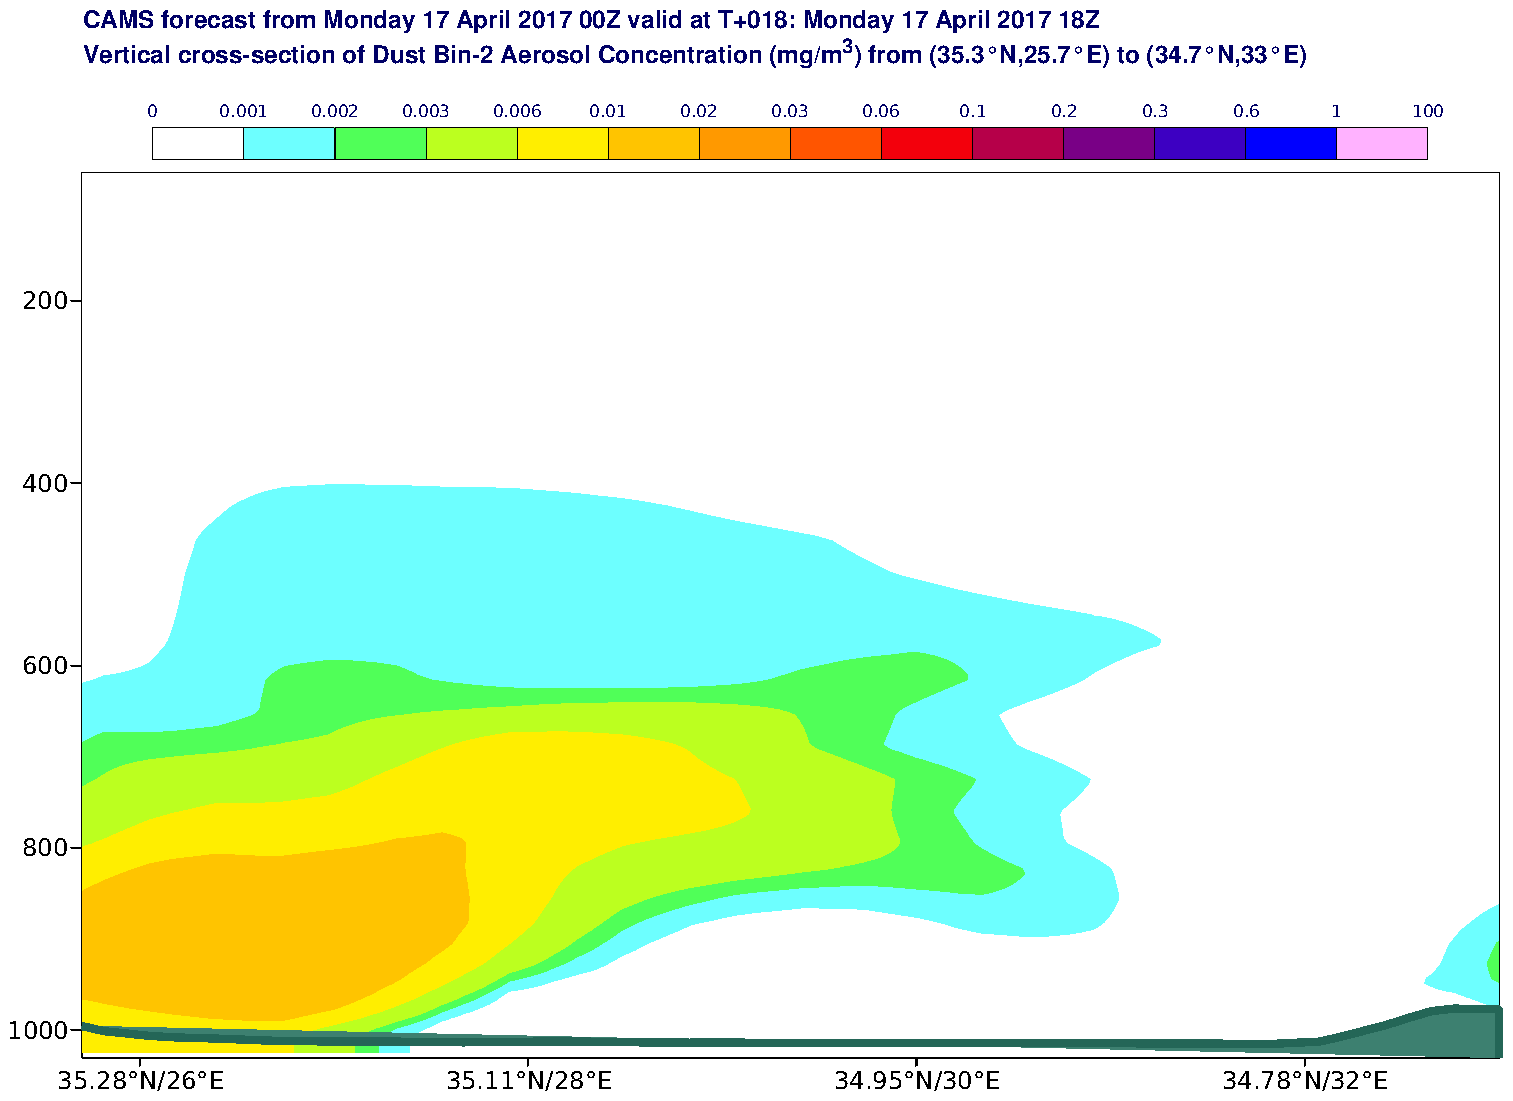 Vertical cross-section of Dust Bin-2 Aerosol Concentration (mg/m3) valid at T18 - 2017-04-17 18:00